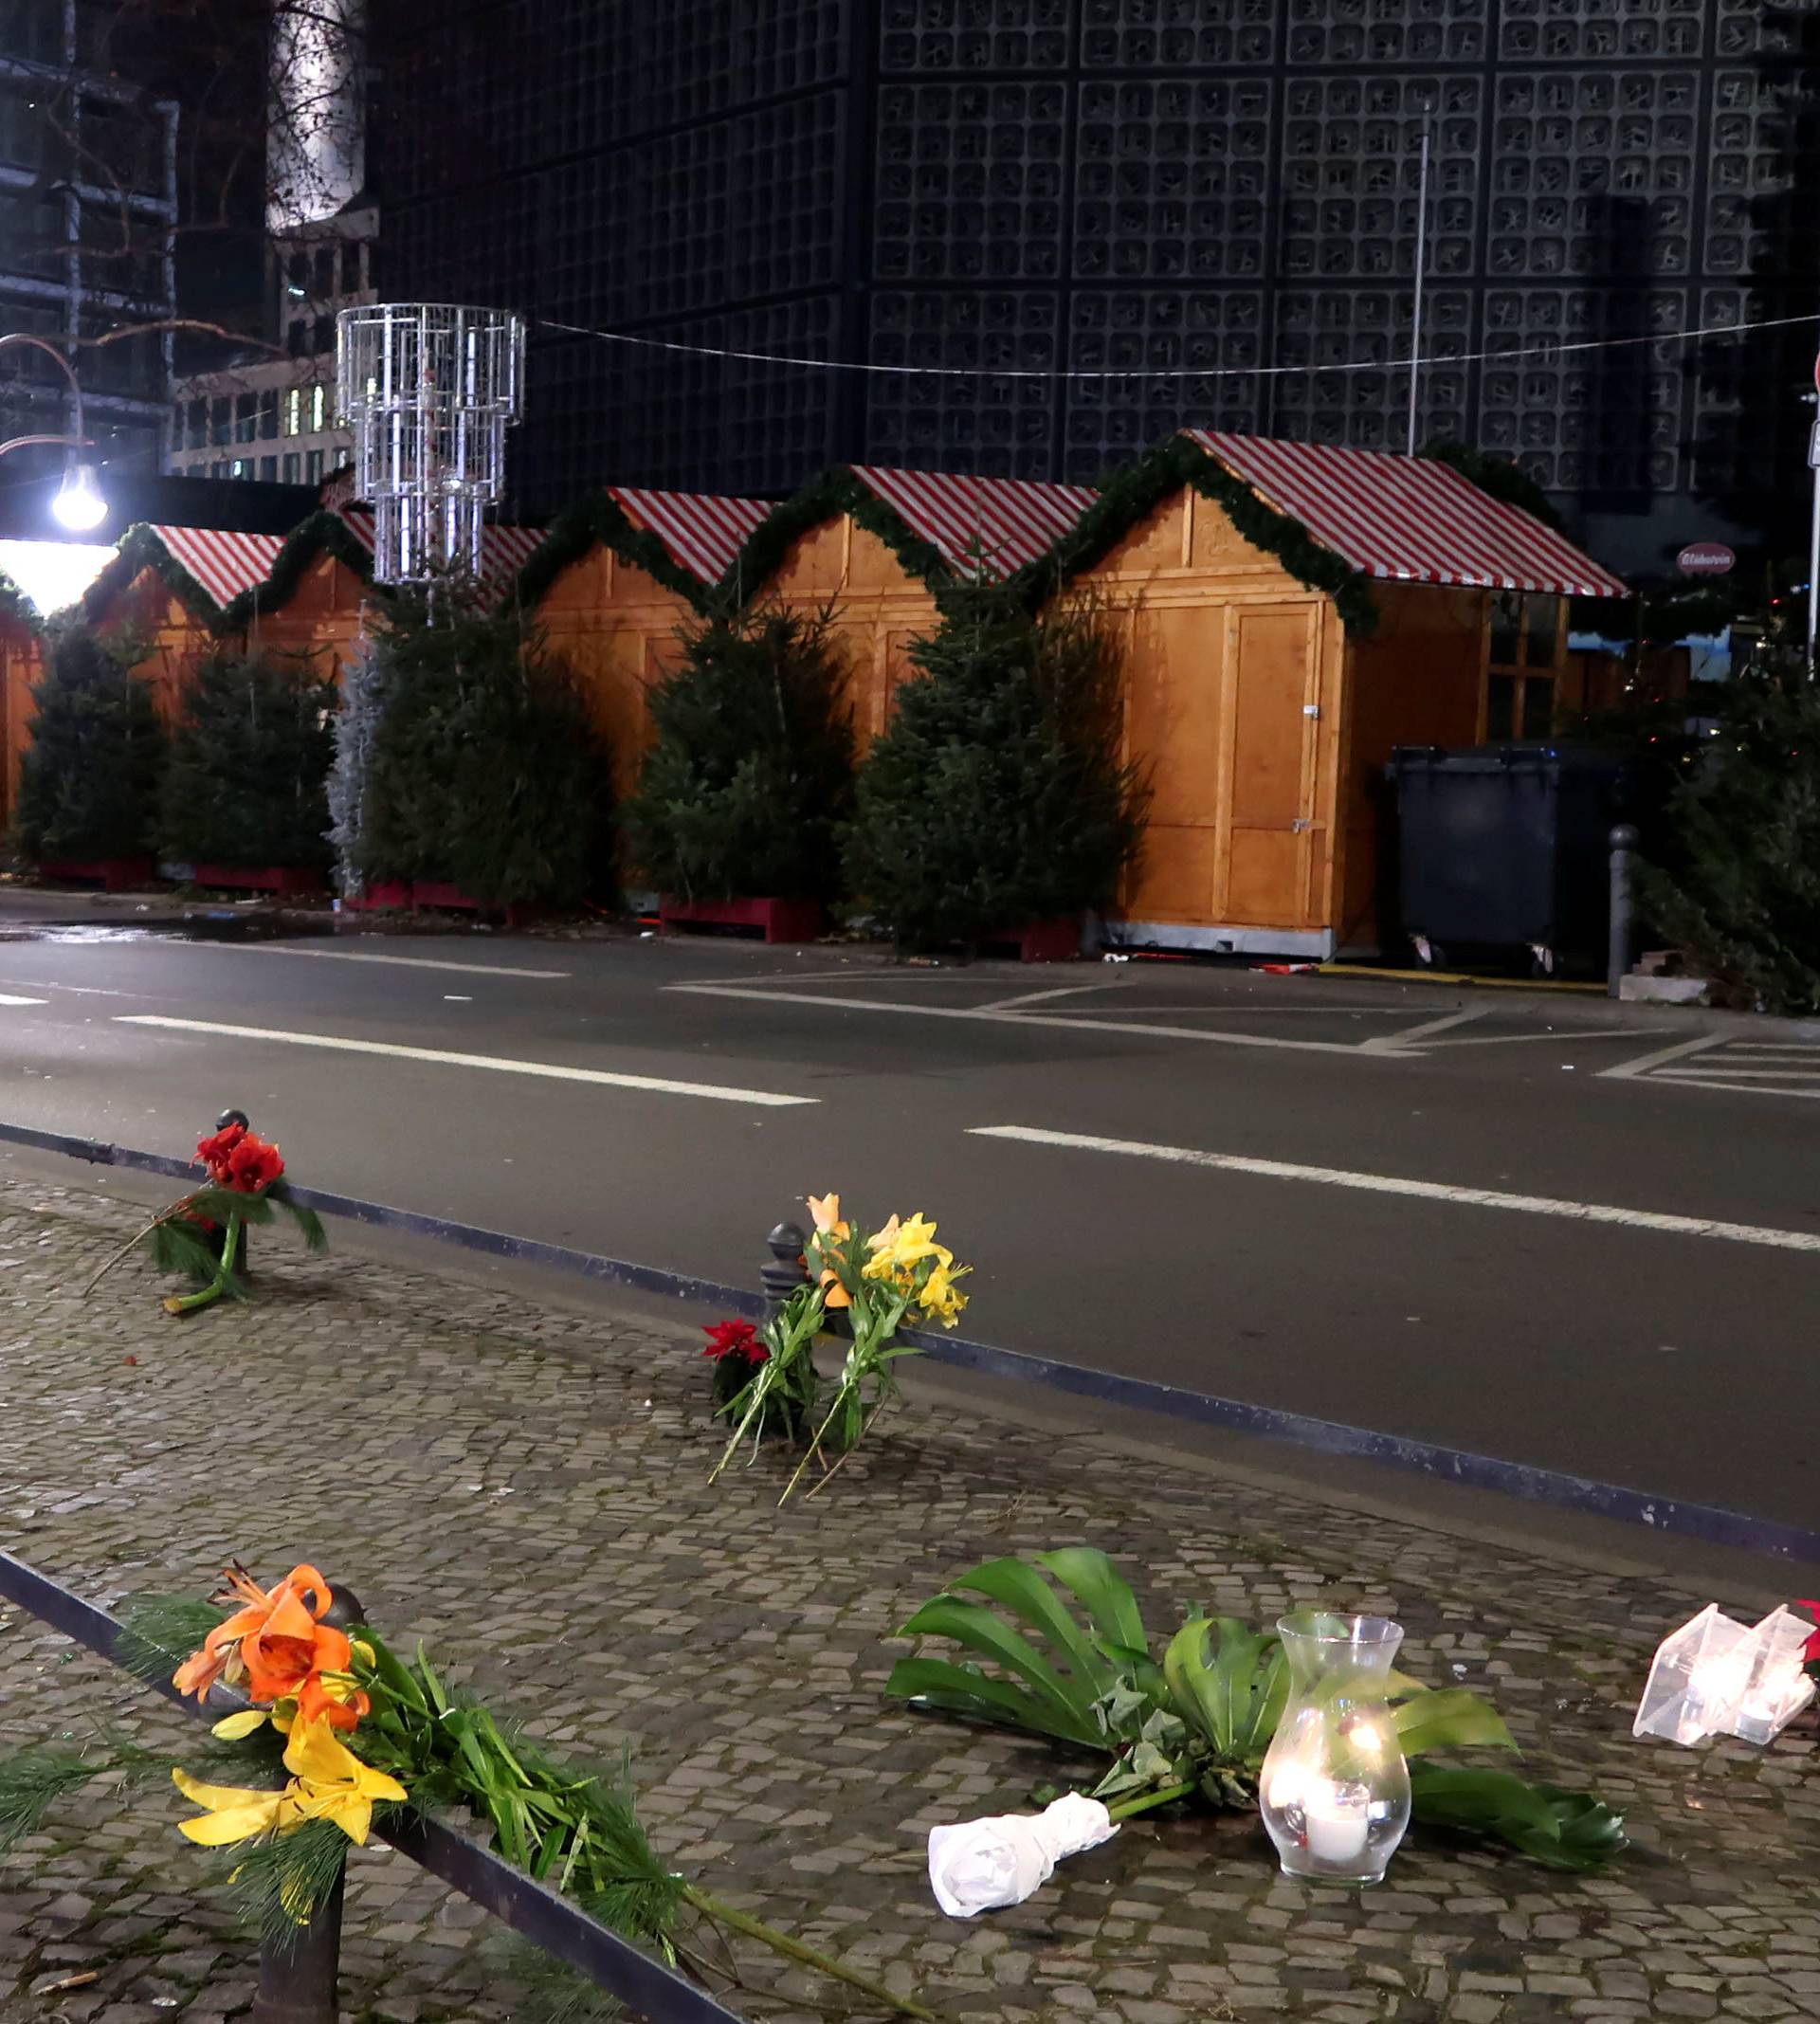 Candles and flowers are seen near the site where a truck ploughed through a crowd at a Berlin Christmas market